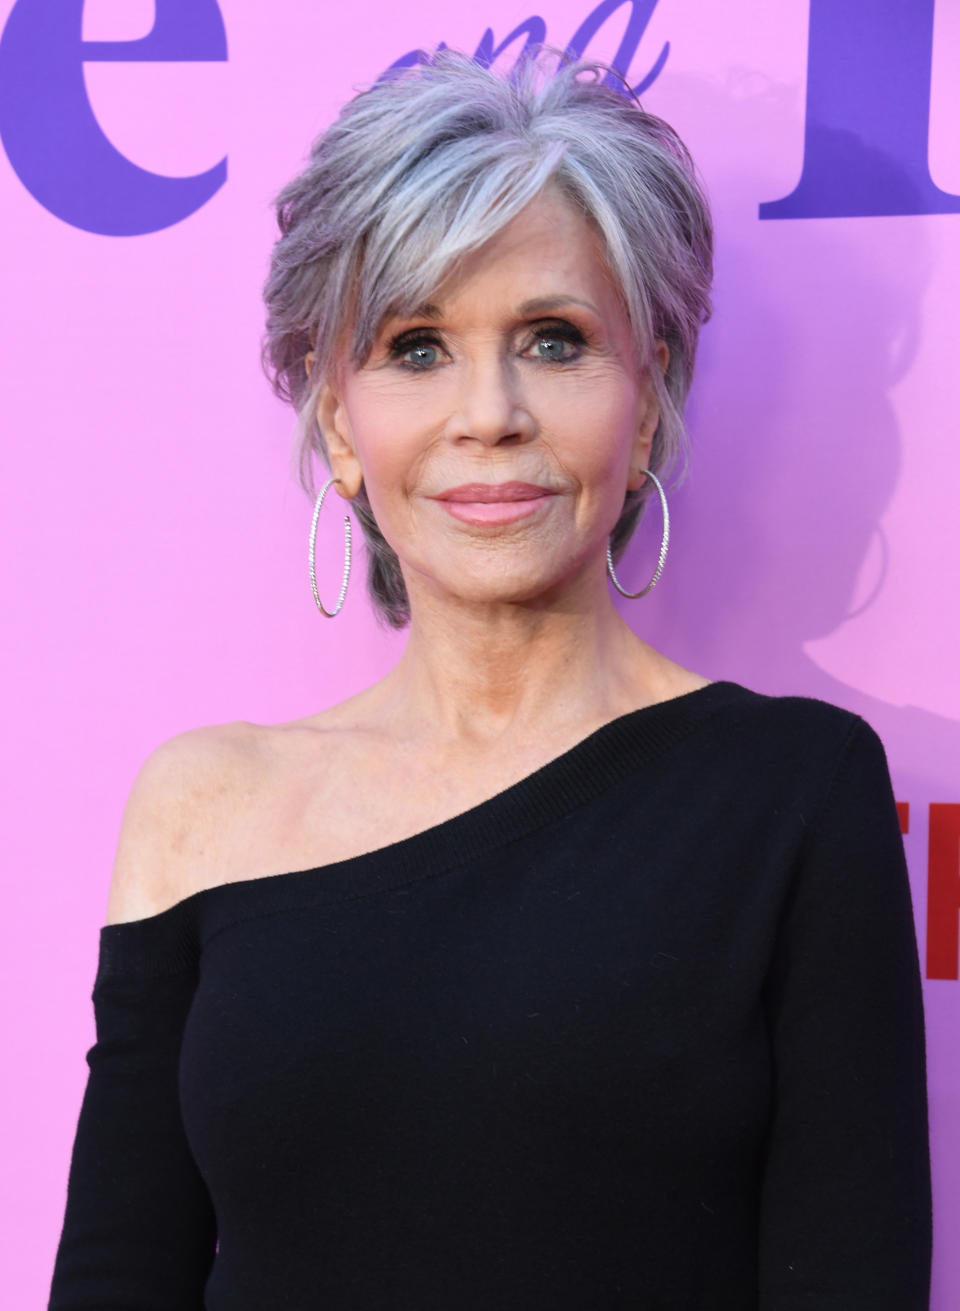 HOLLYWOOD, CALIFORNIA - APRIL 23: Jane Fonda attends the Los Angeles Special FYC Event For Netflix's 